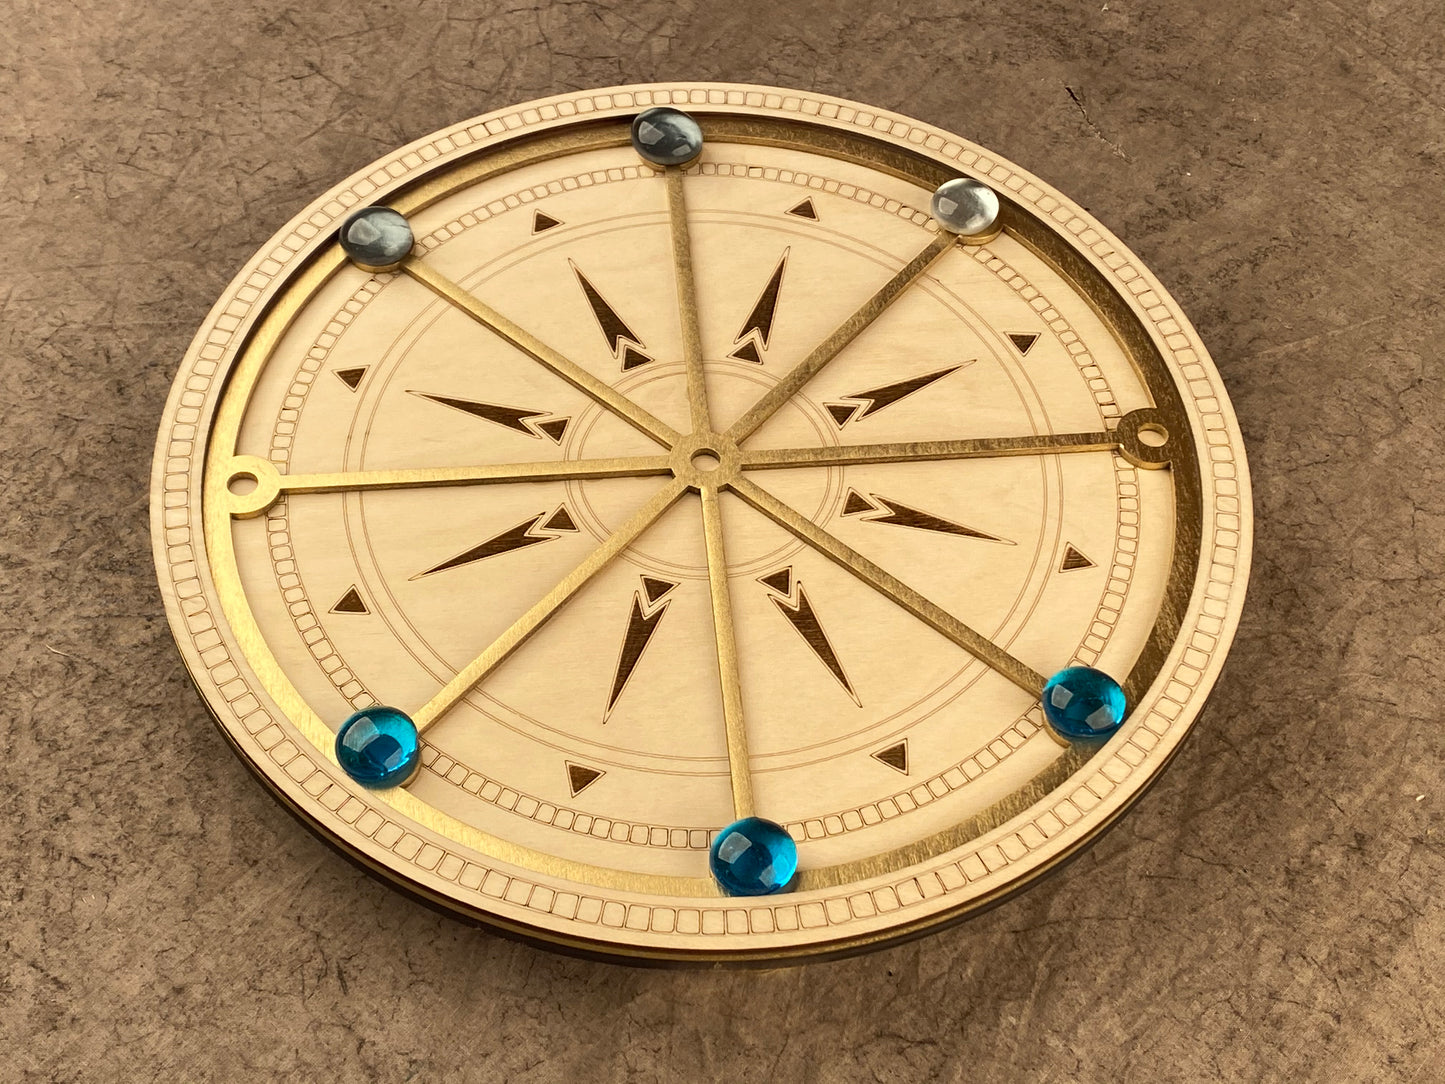 Rota ~ The Ancient Roman Game of Strategy. Beautiful Game fit for the Roman Senate.